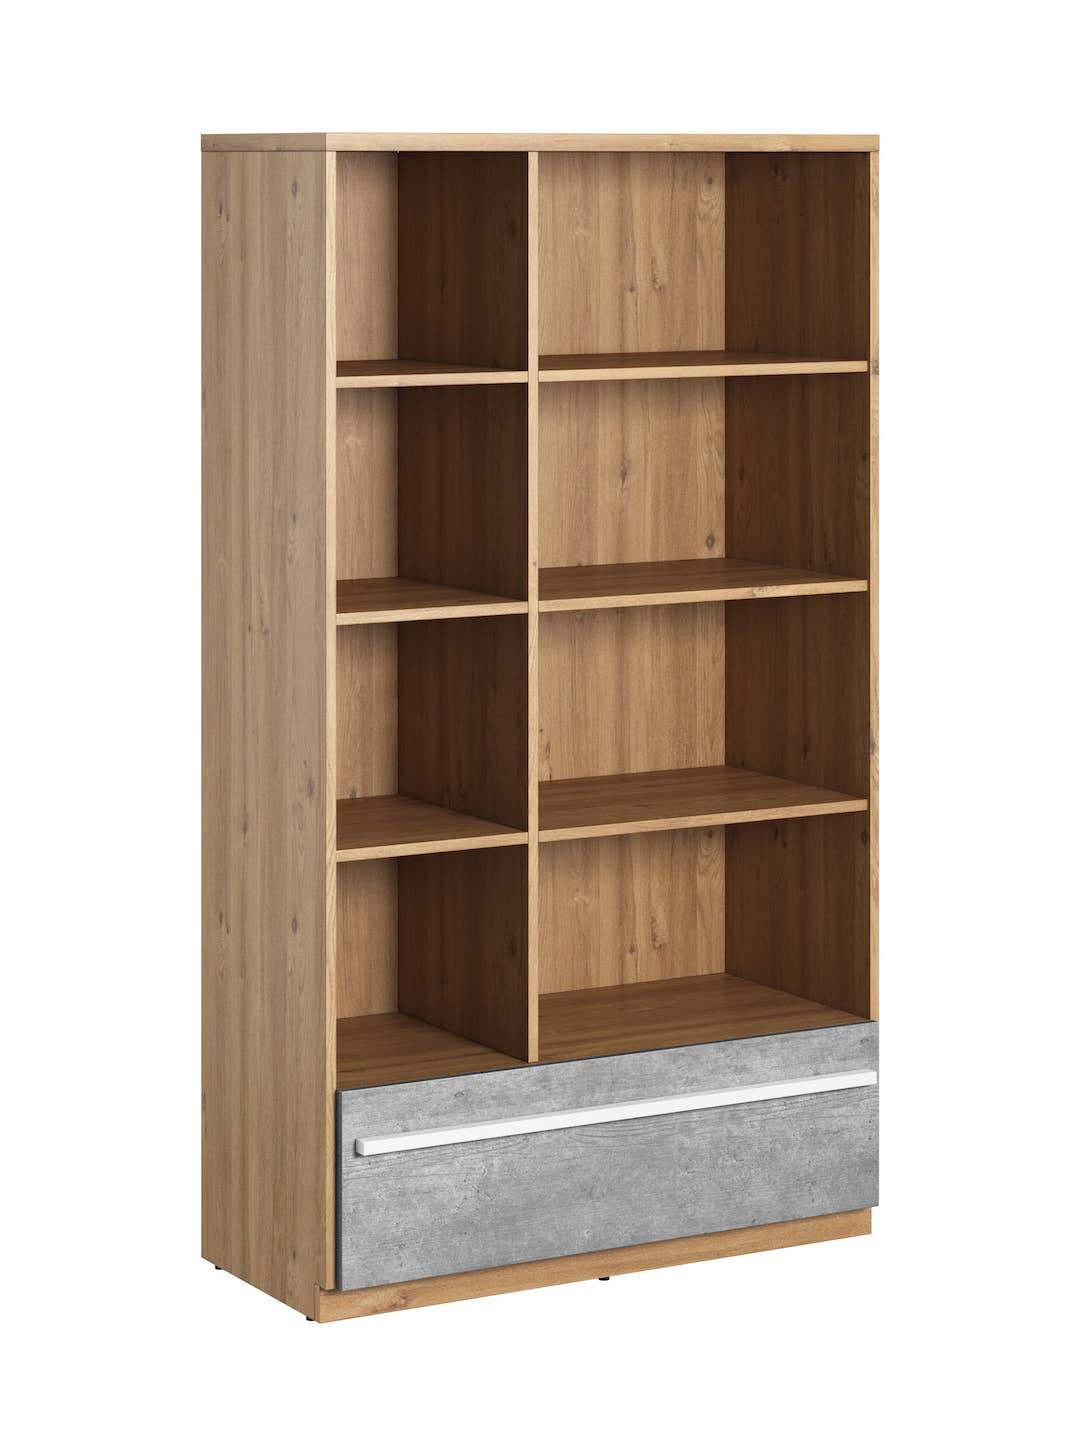 View Plano PN03 Bookcase information